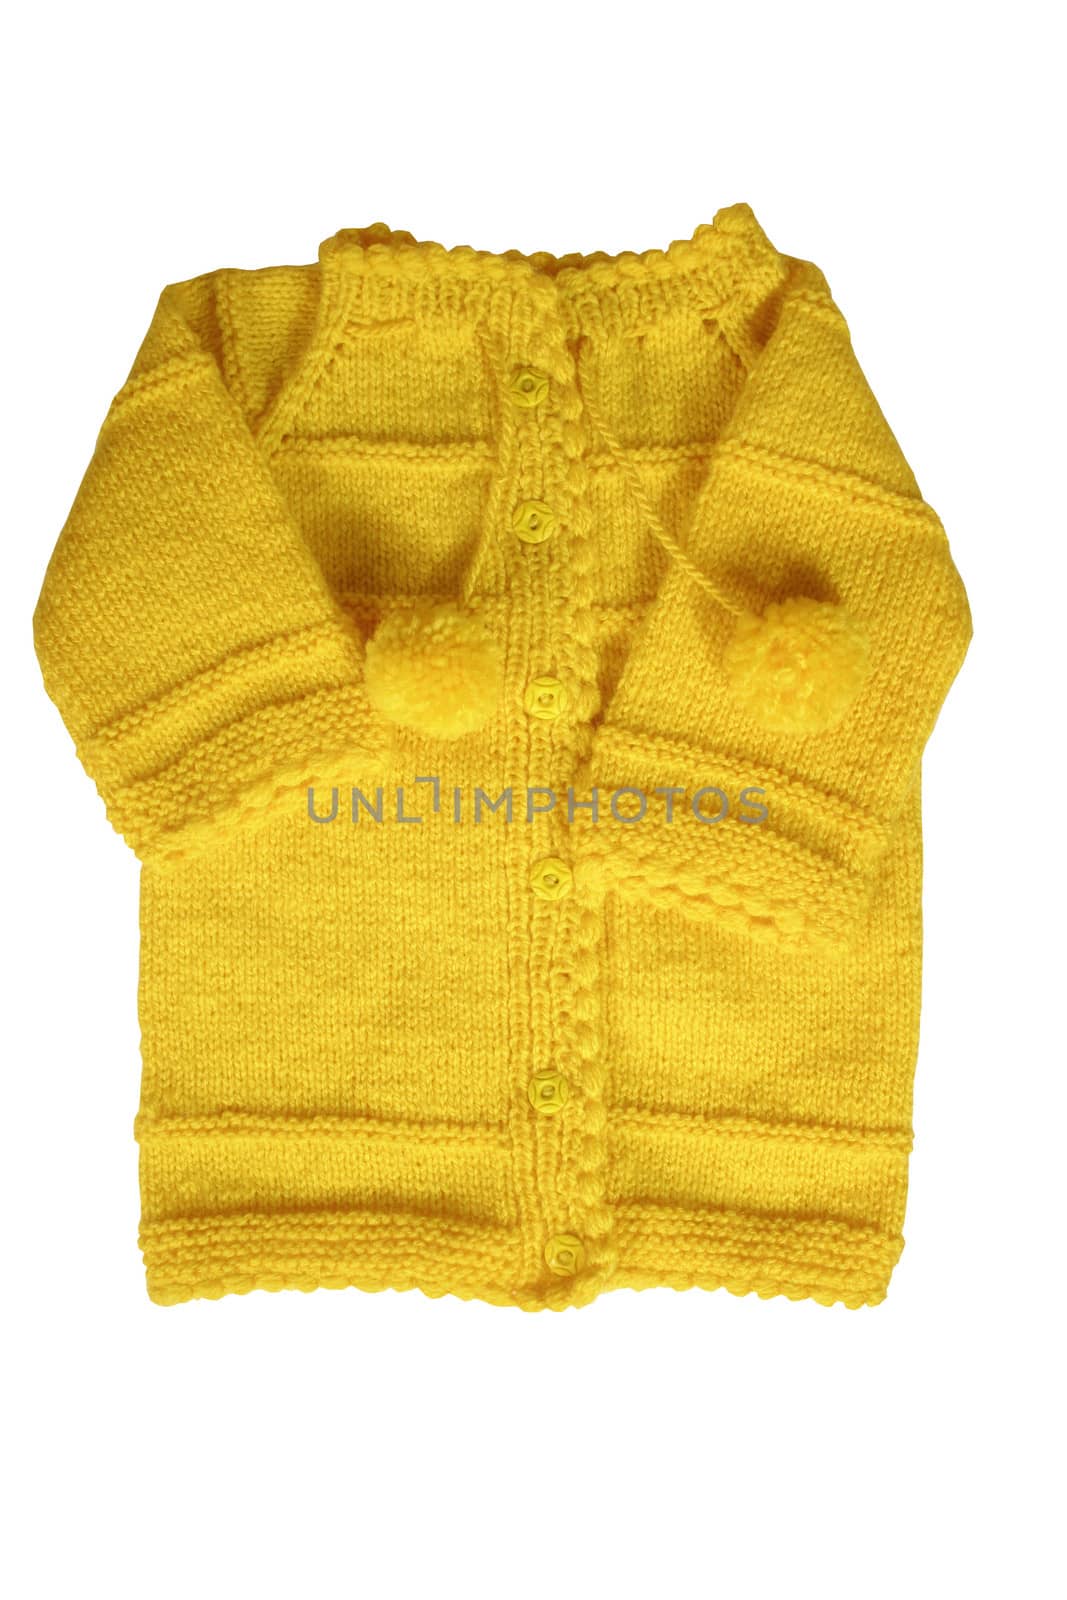 baby cardigan over white by Dr.G